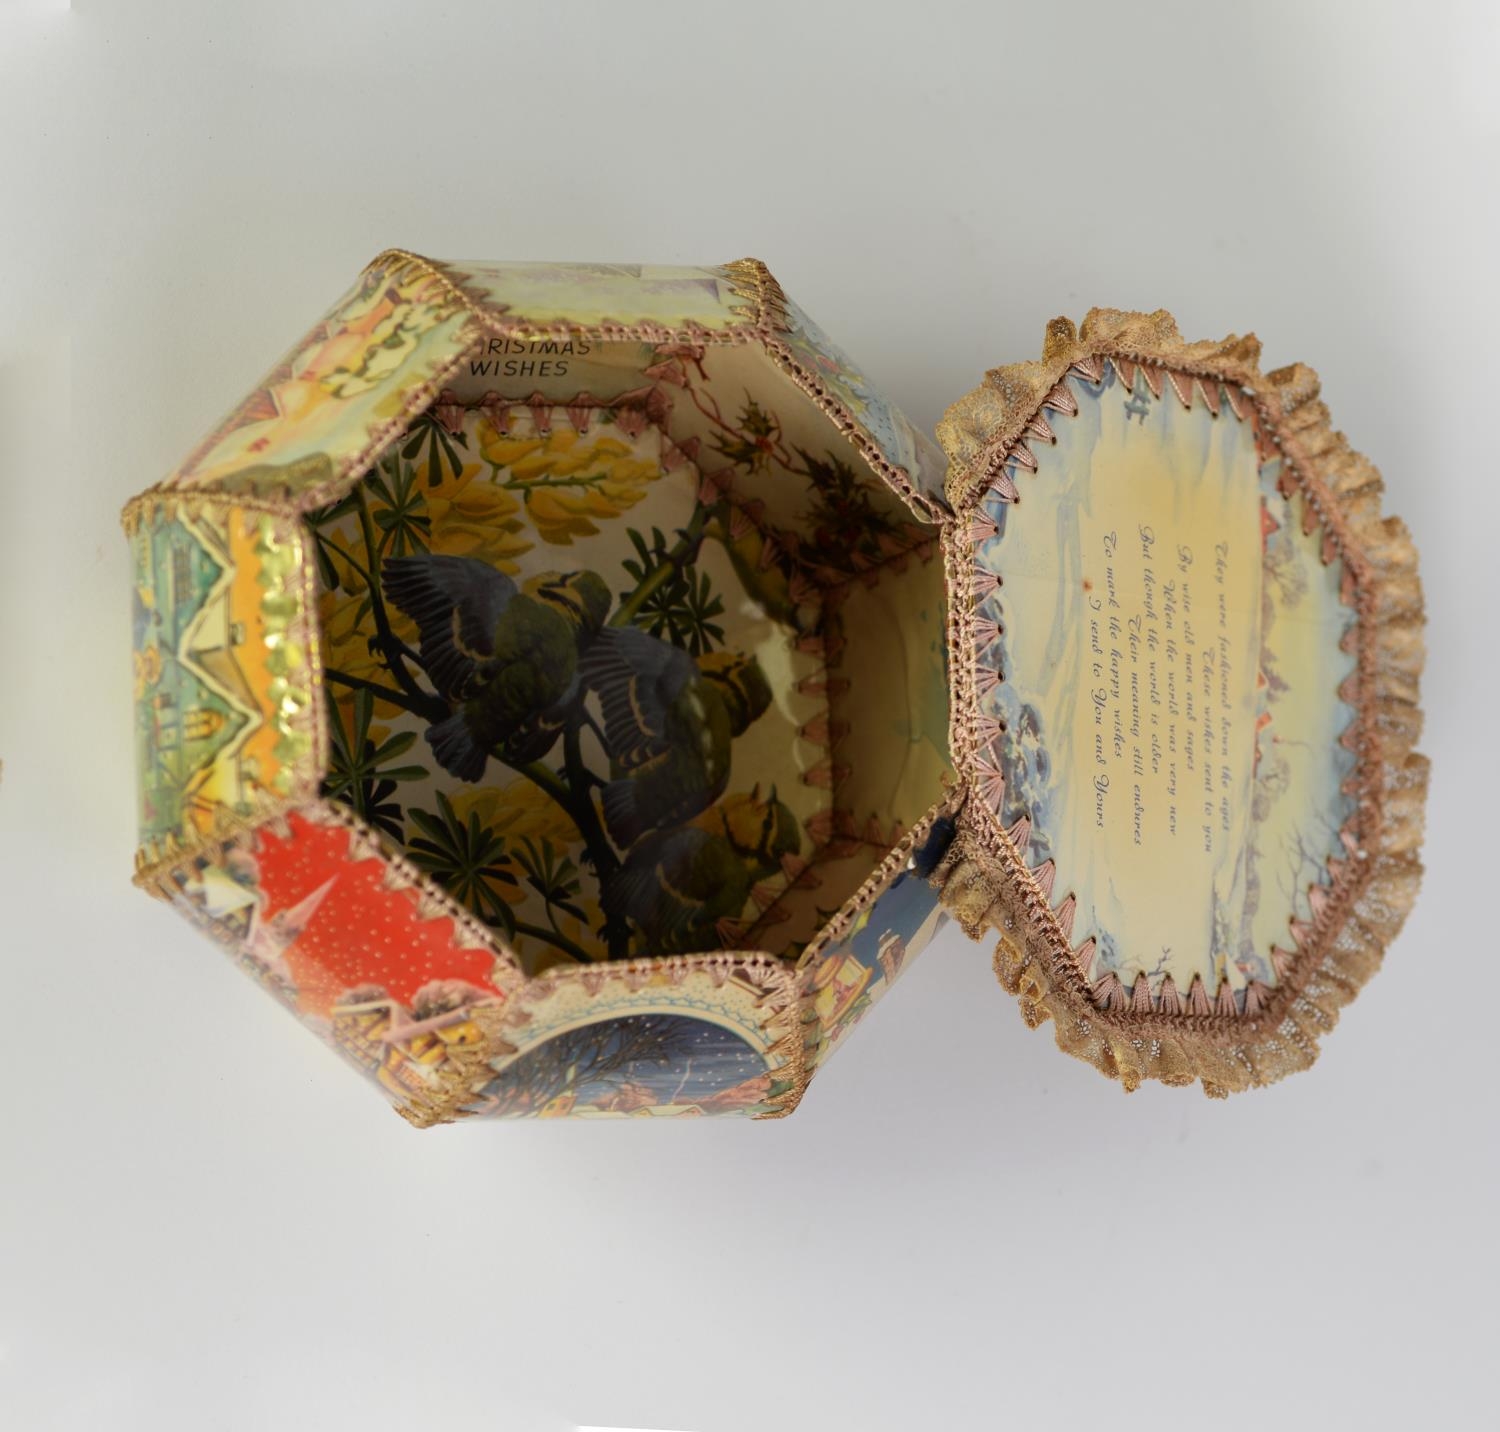 CIRCA 1920's PLASTIC CHRISTMAS BOX 'THE SEASONS HAPPY GREETINGS' of hexagonal and stitched form, all - Image 8 of 10